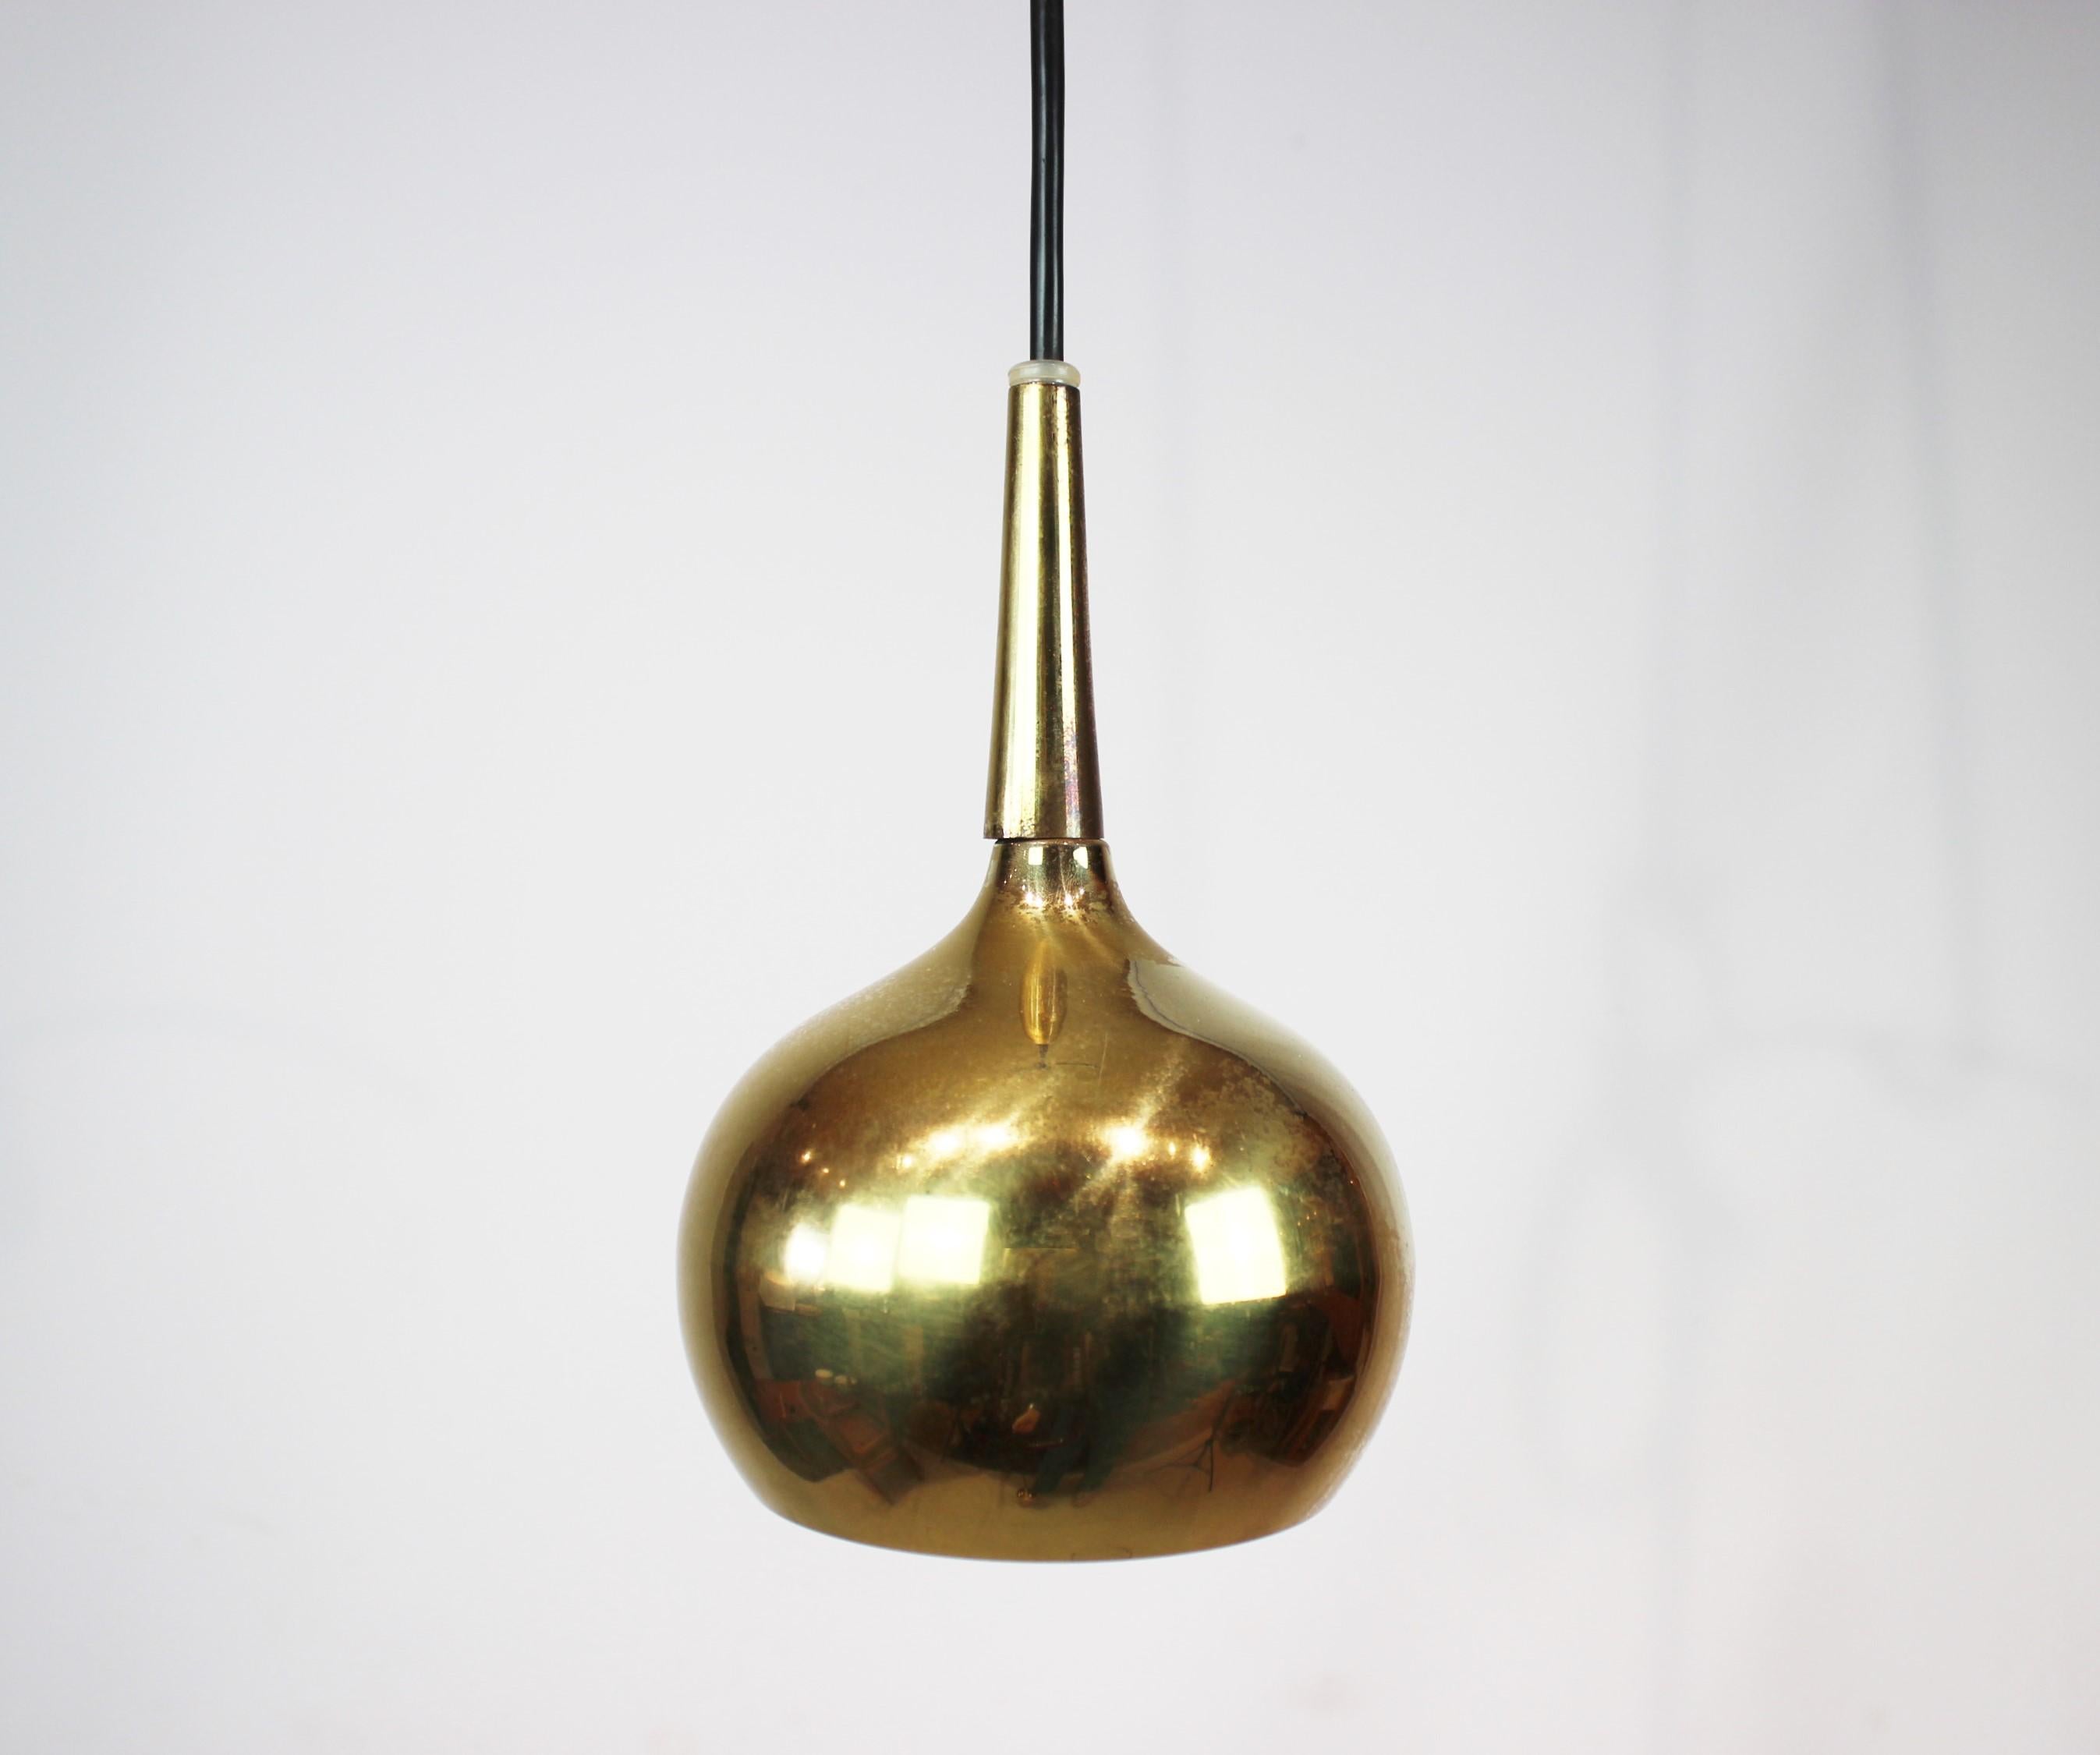 A pair of brass pendants of Danish design from the 1960s. The pendants are in good vintage condition.
Measures: Height - 20 cm and diameter - 11 cm.